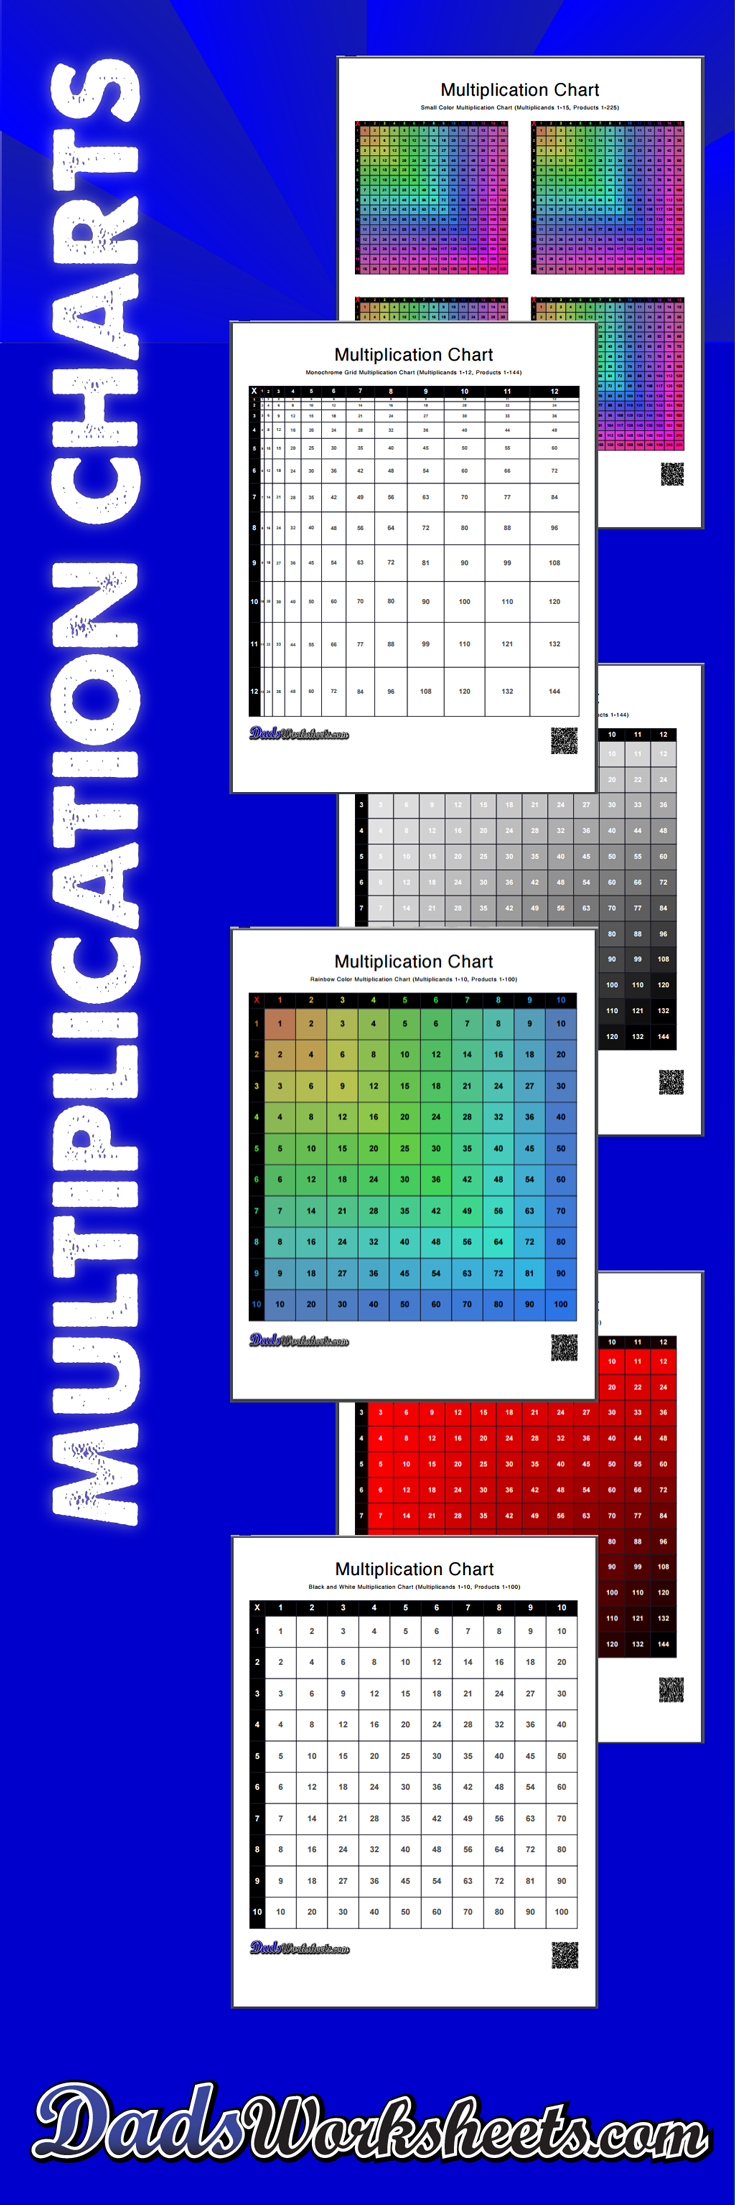 Multiplication Charts: 59 High Resolution Printable Pdfs, 1